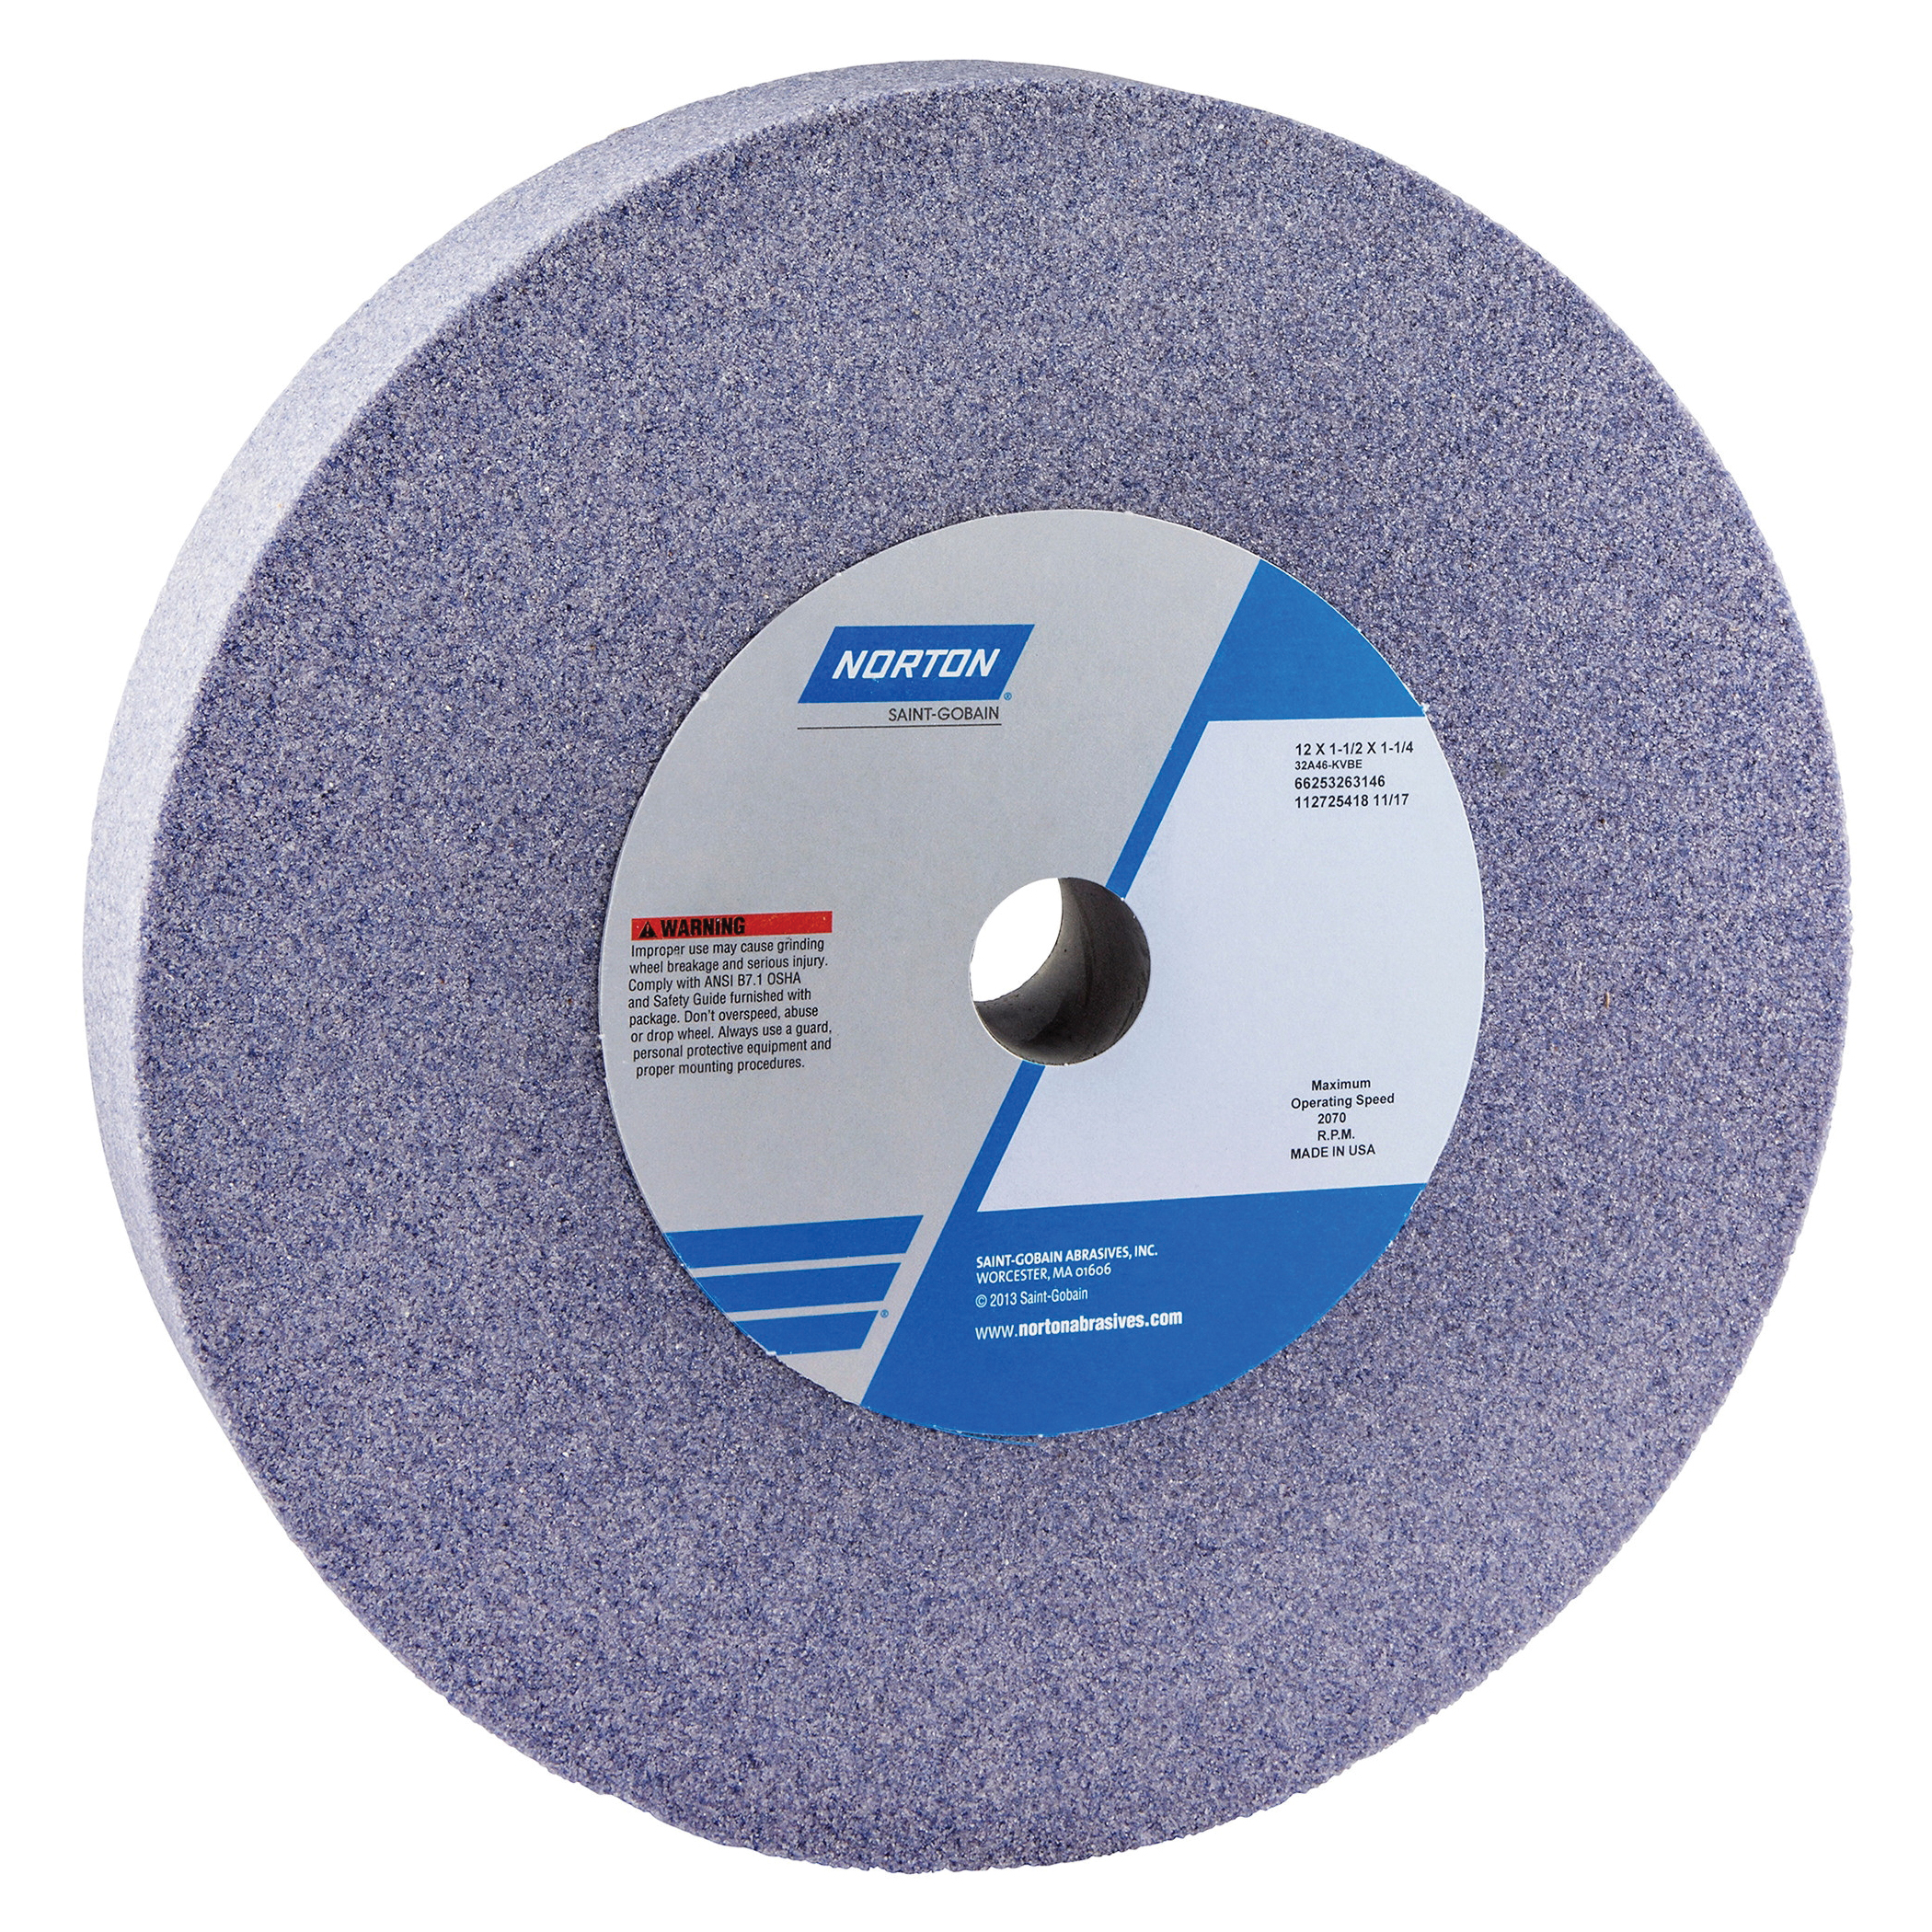 Norton® 66253263146 32A Straight Toolroom Wheel, 12 in Dia x 1-1/2 in THK, 1-1/4 in Center Hole, 46 Grit, Aluminum Oxide Abrasive